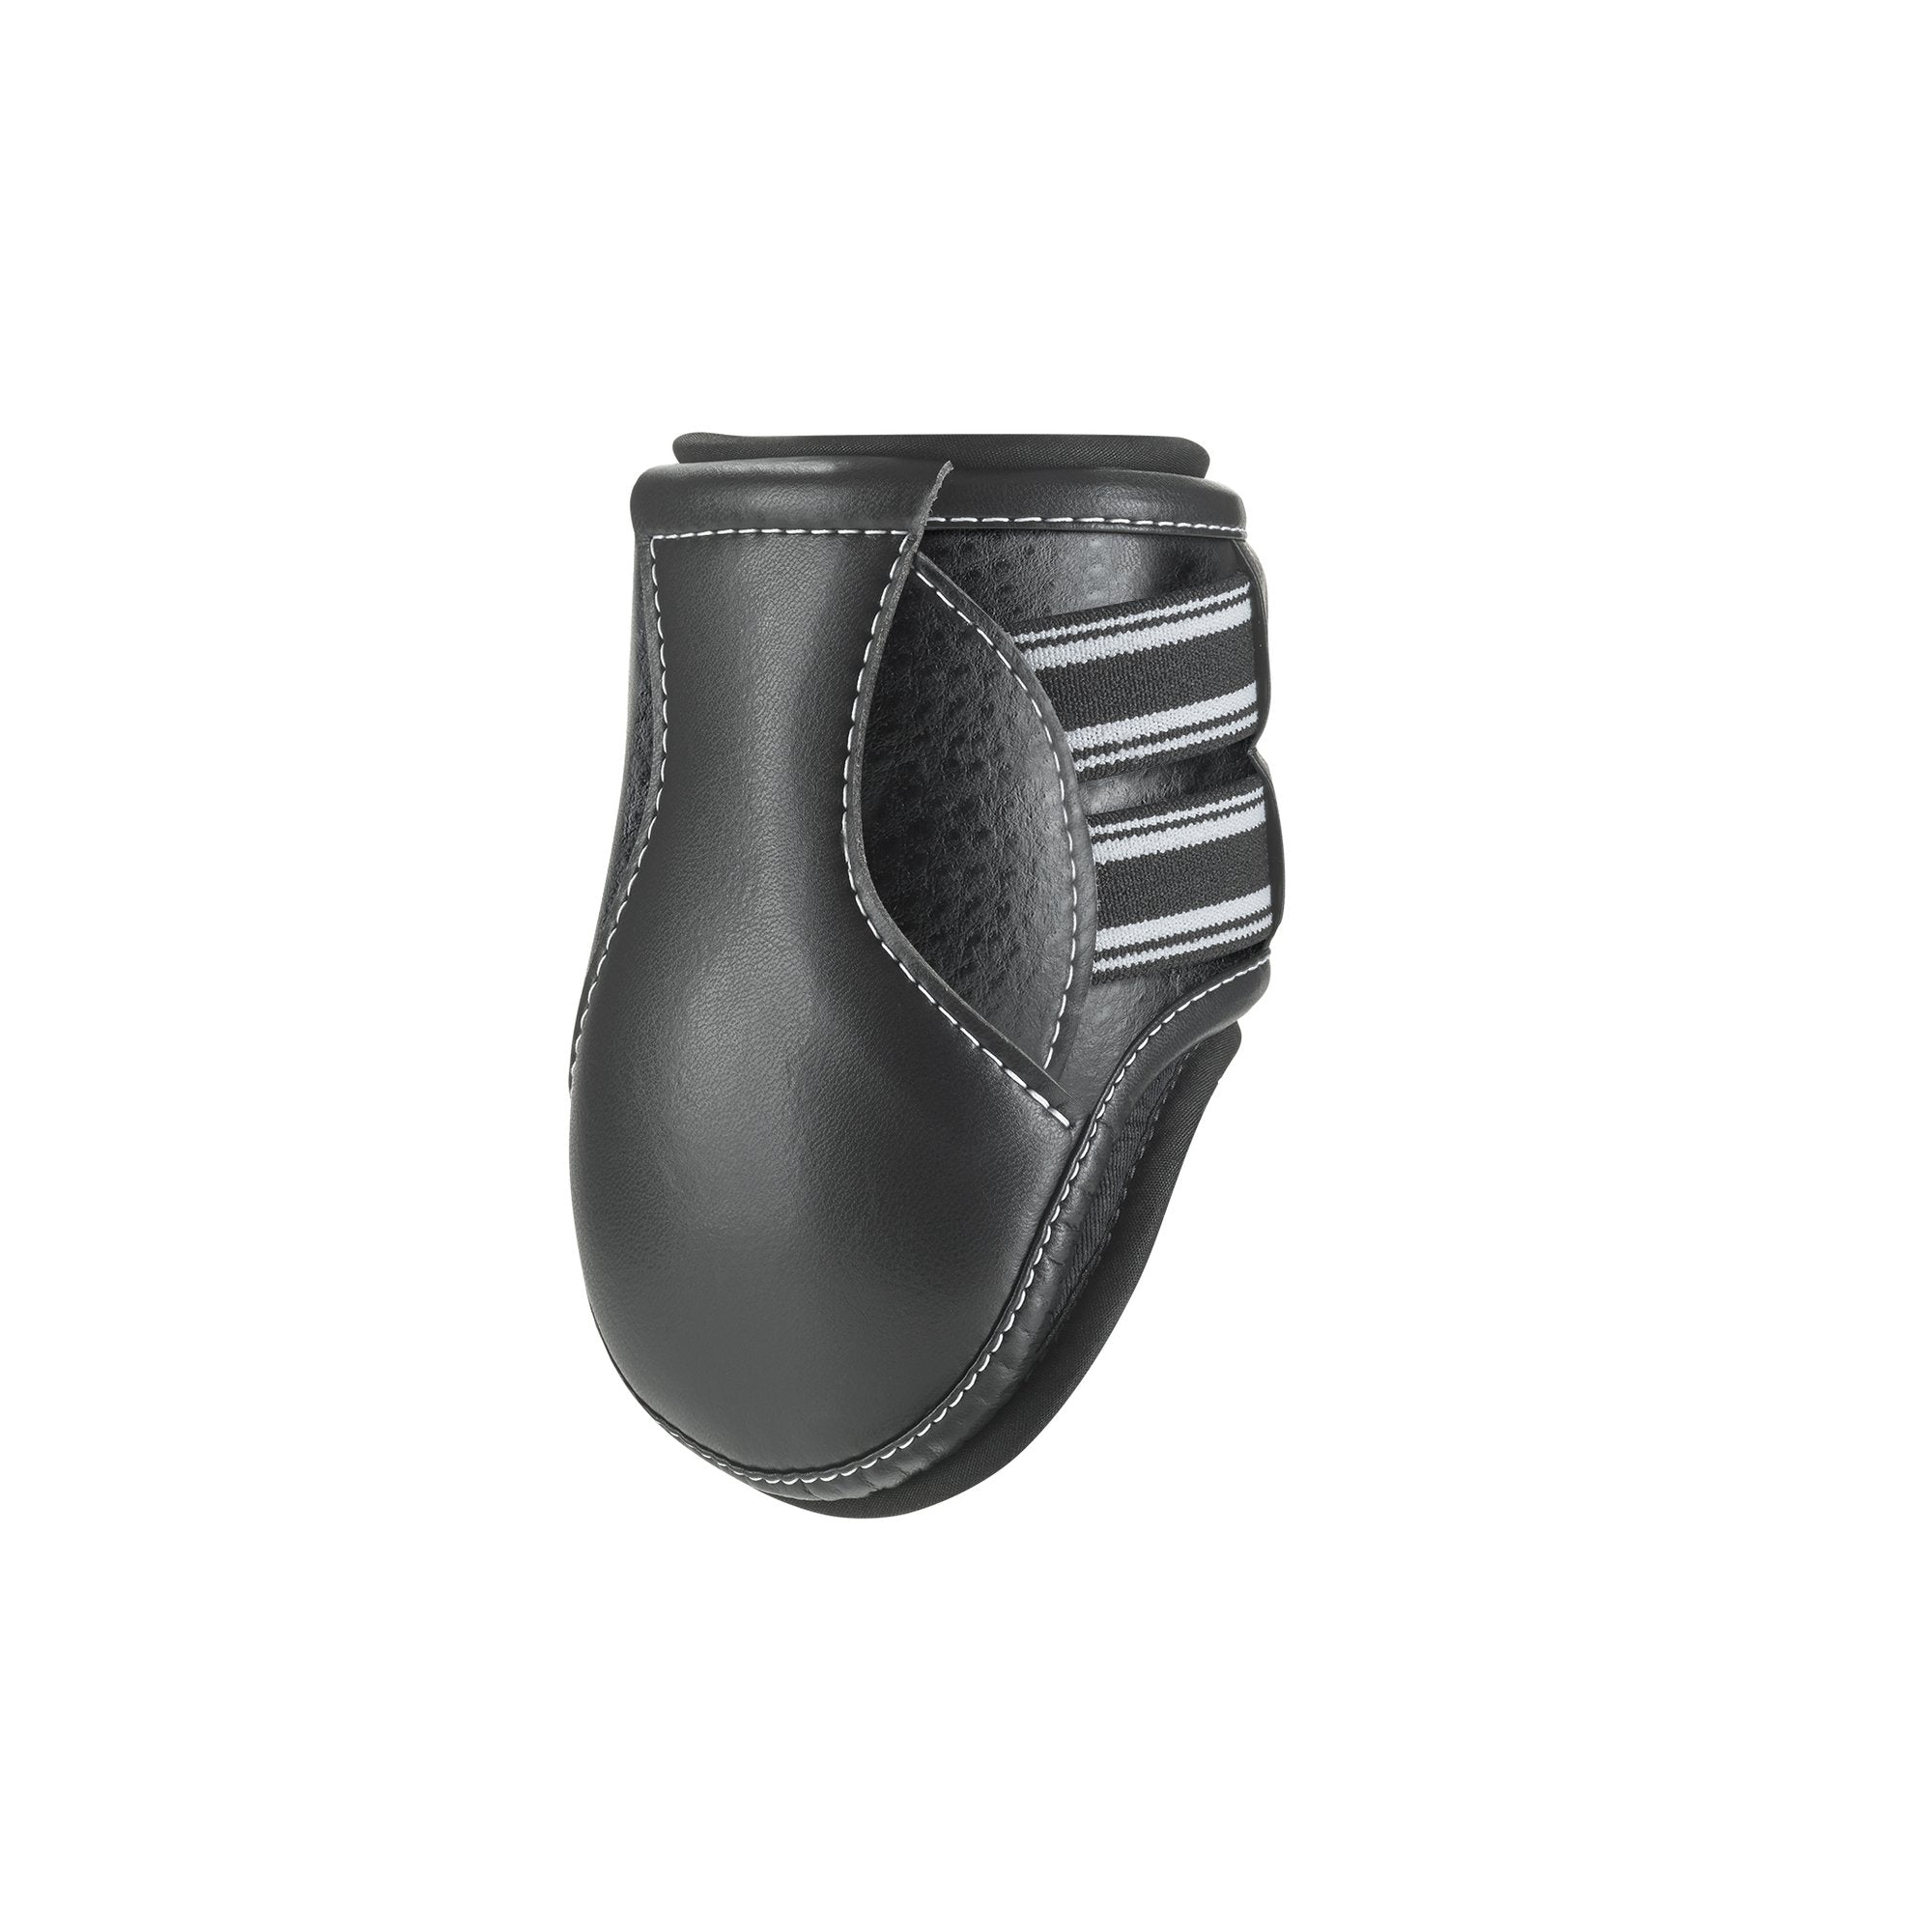 EquiFit D-Teq™ Hind Boot with ImpacTeq™ Liner